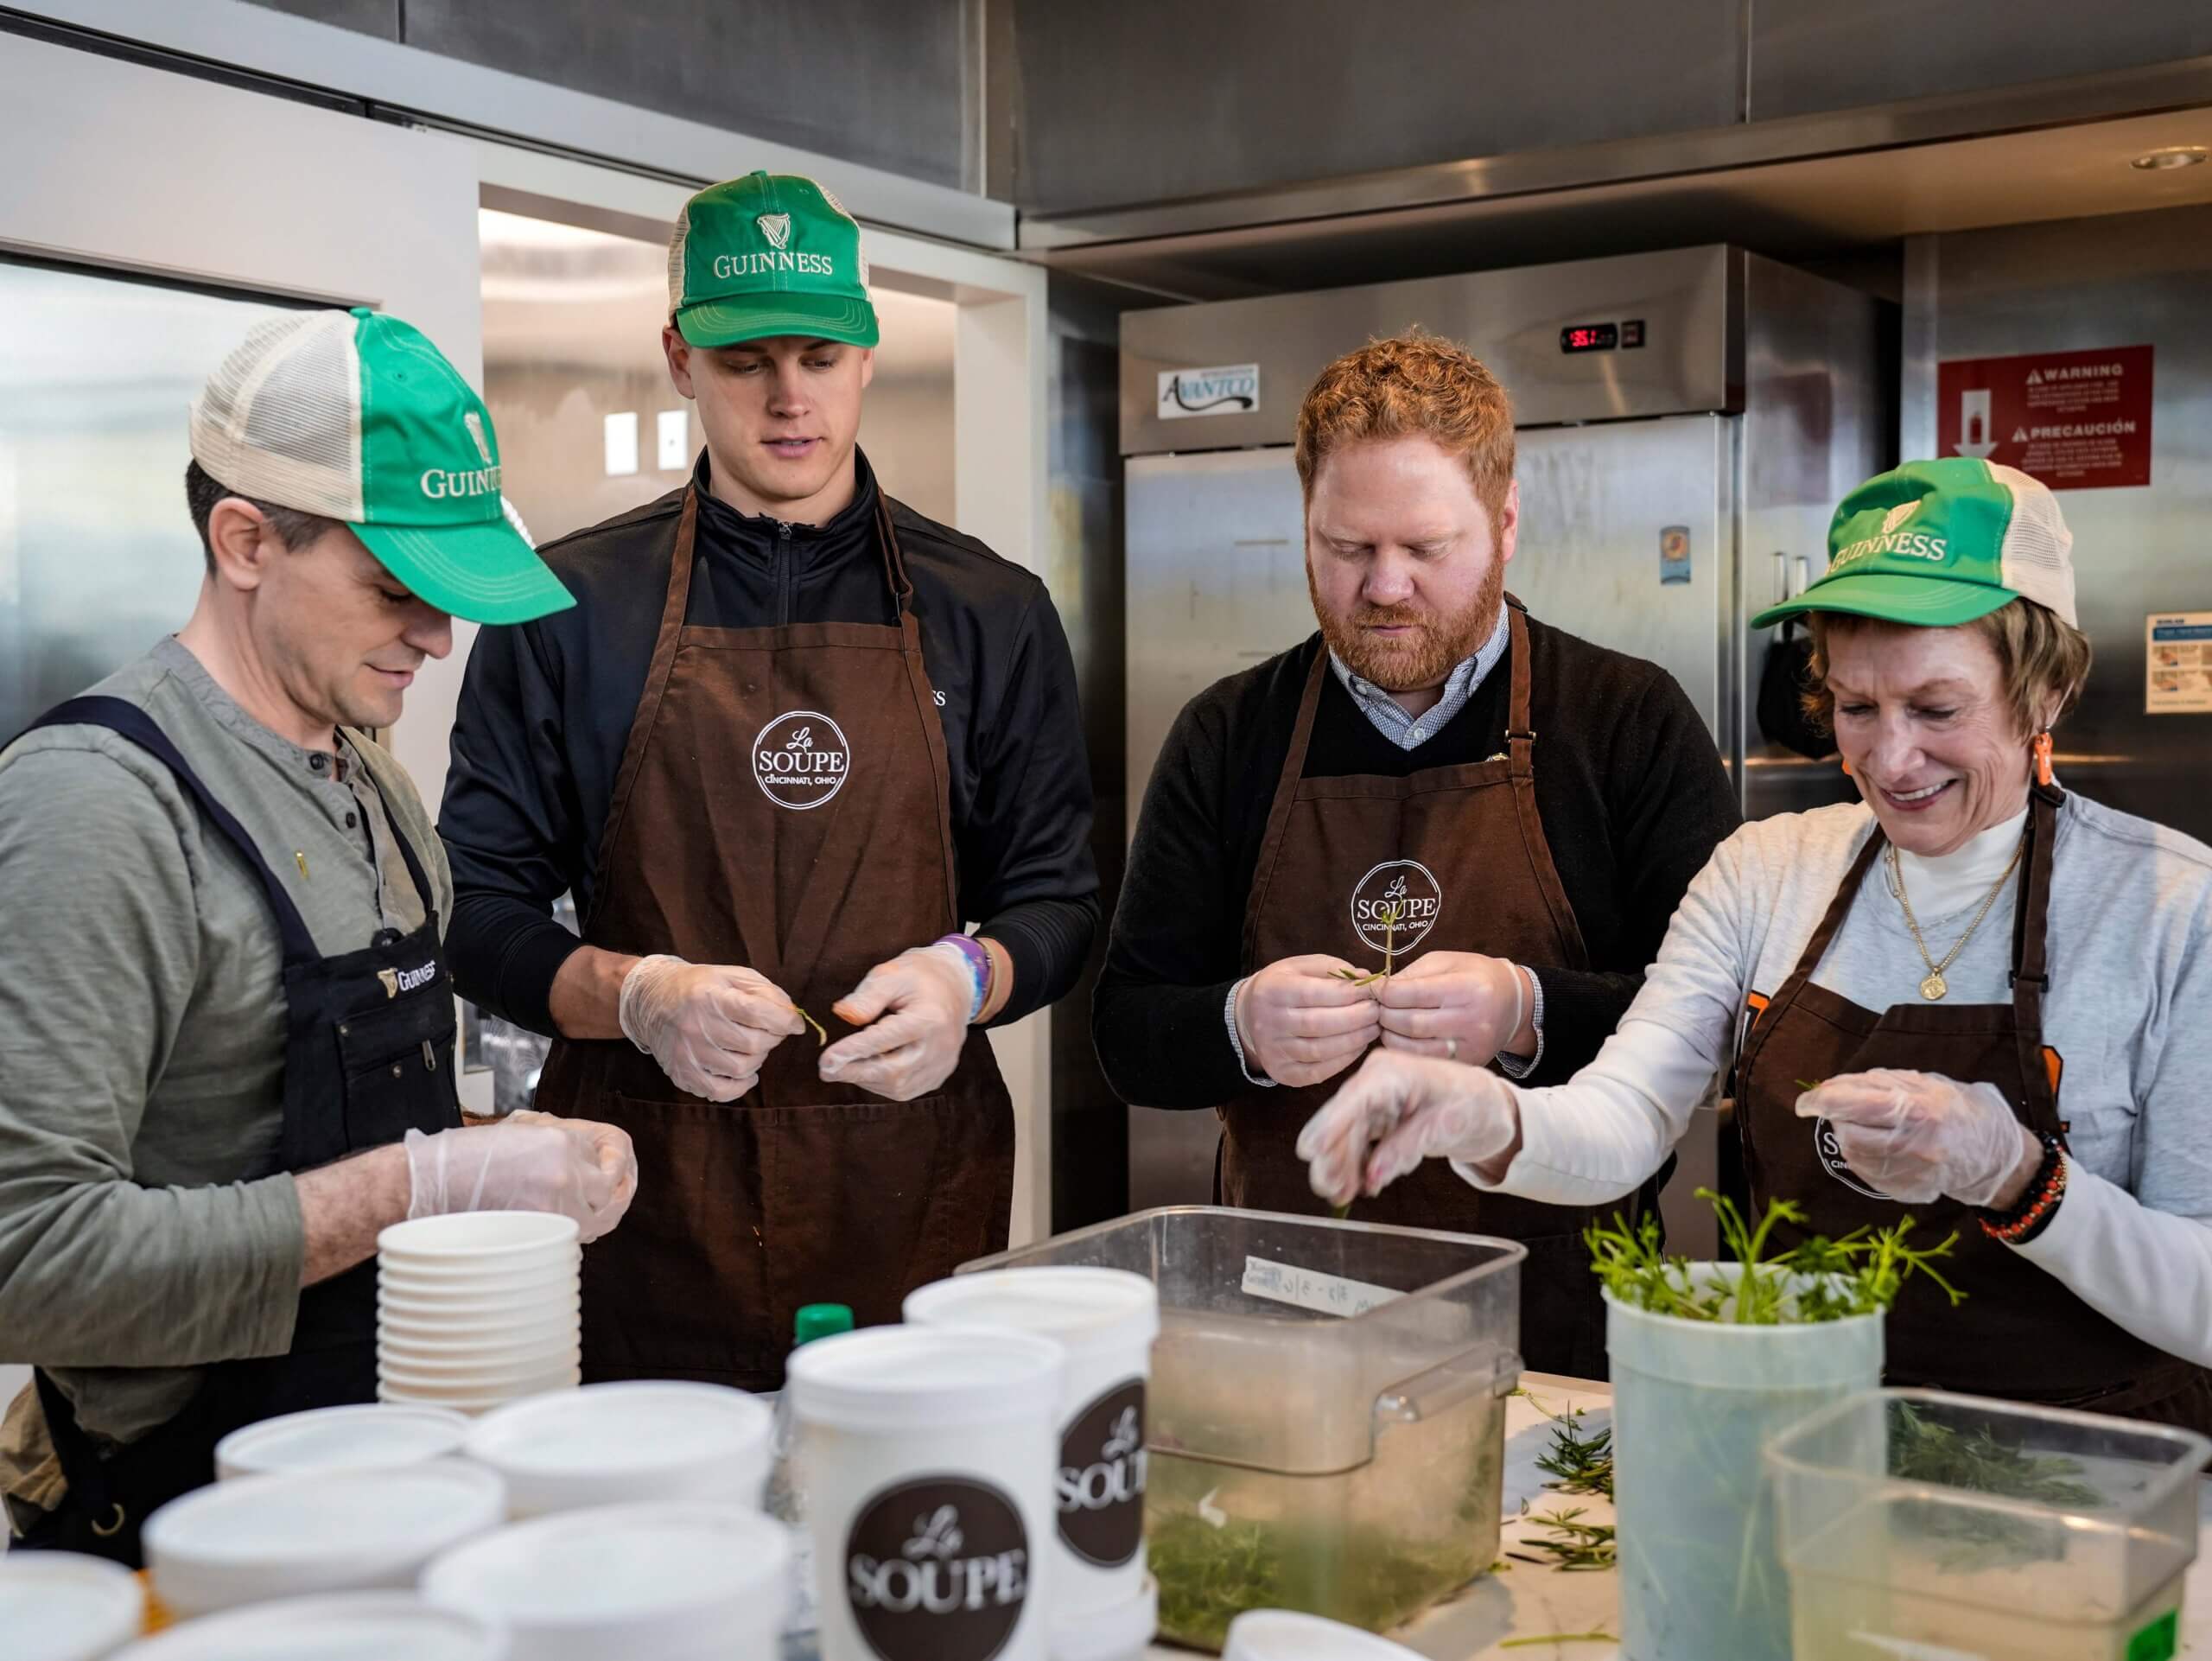 Joe Burrow Foundation teams up with La Soupe at Guinness Gives Back service event.